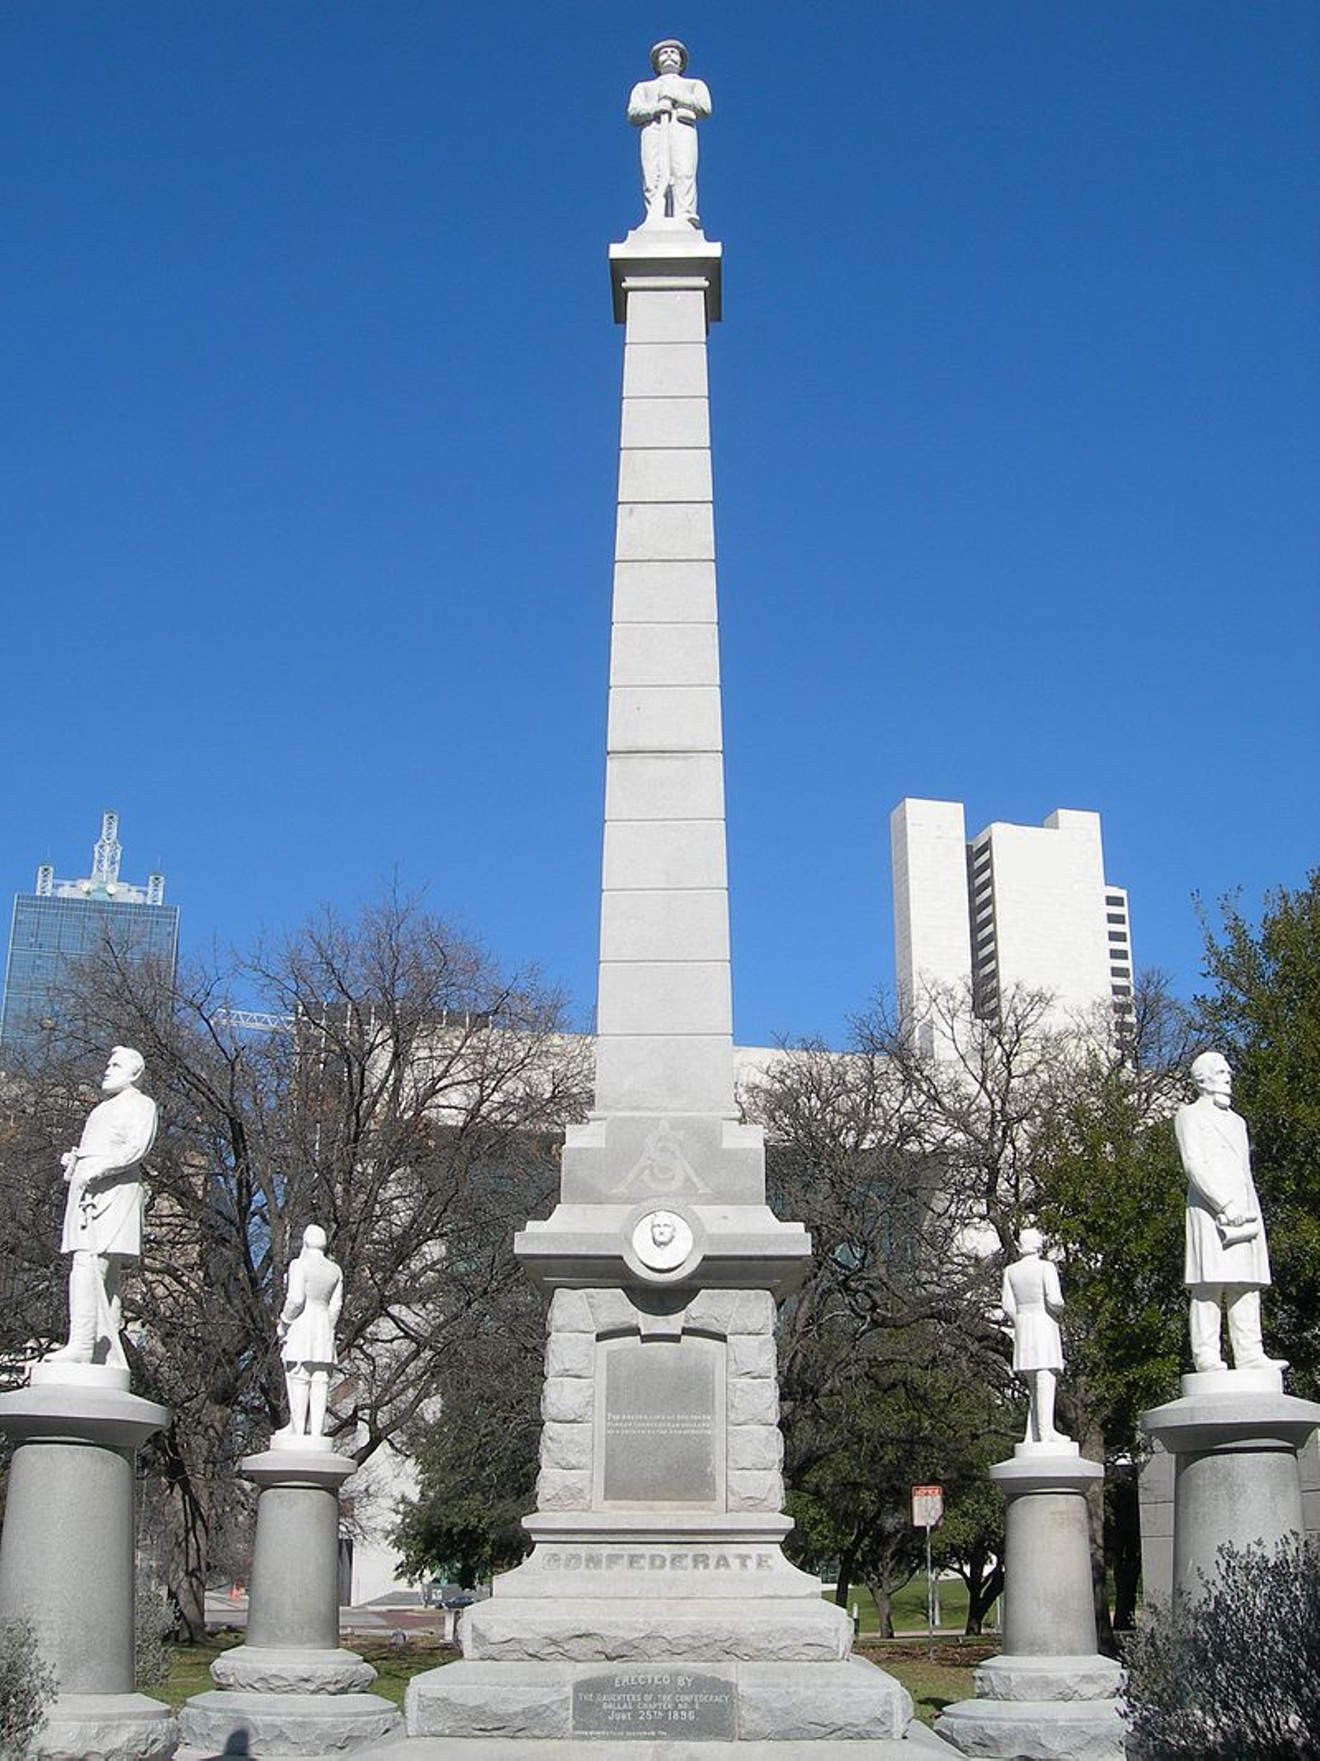 Dallas' Confederate war memorial should be removed, the city's Confederate Monuments Task Force said.